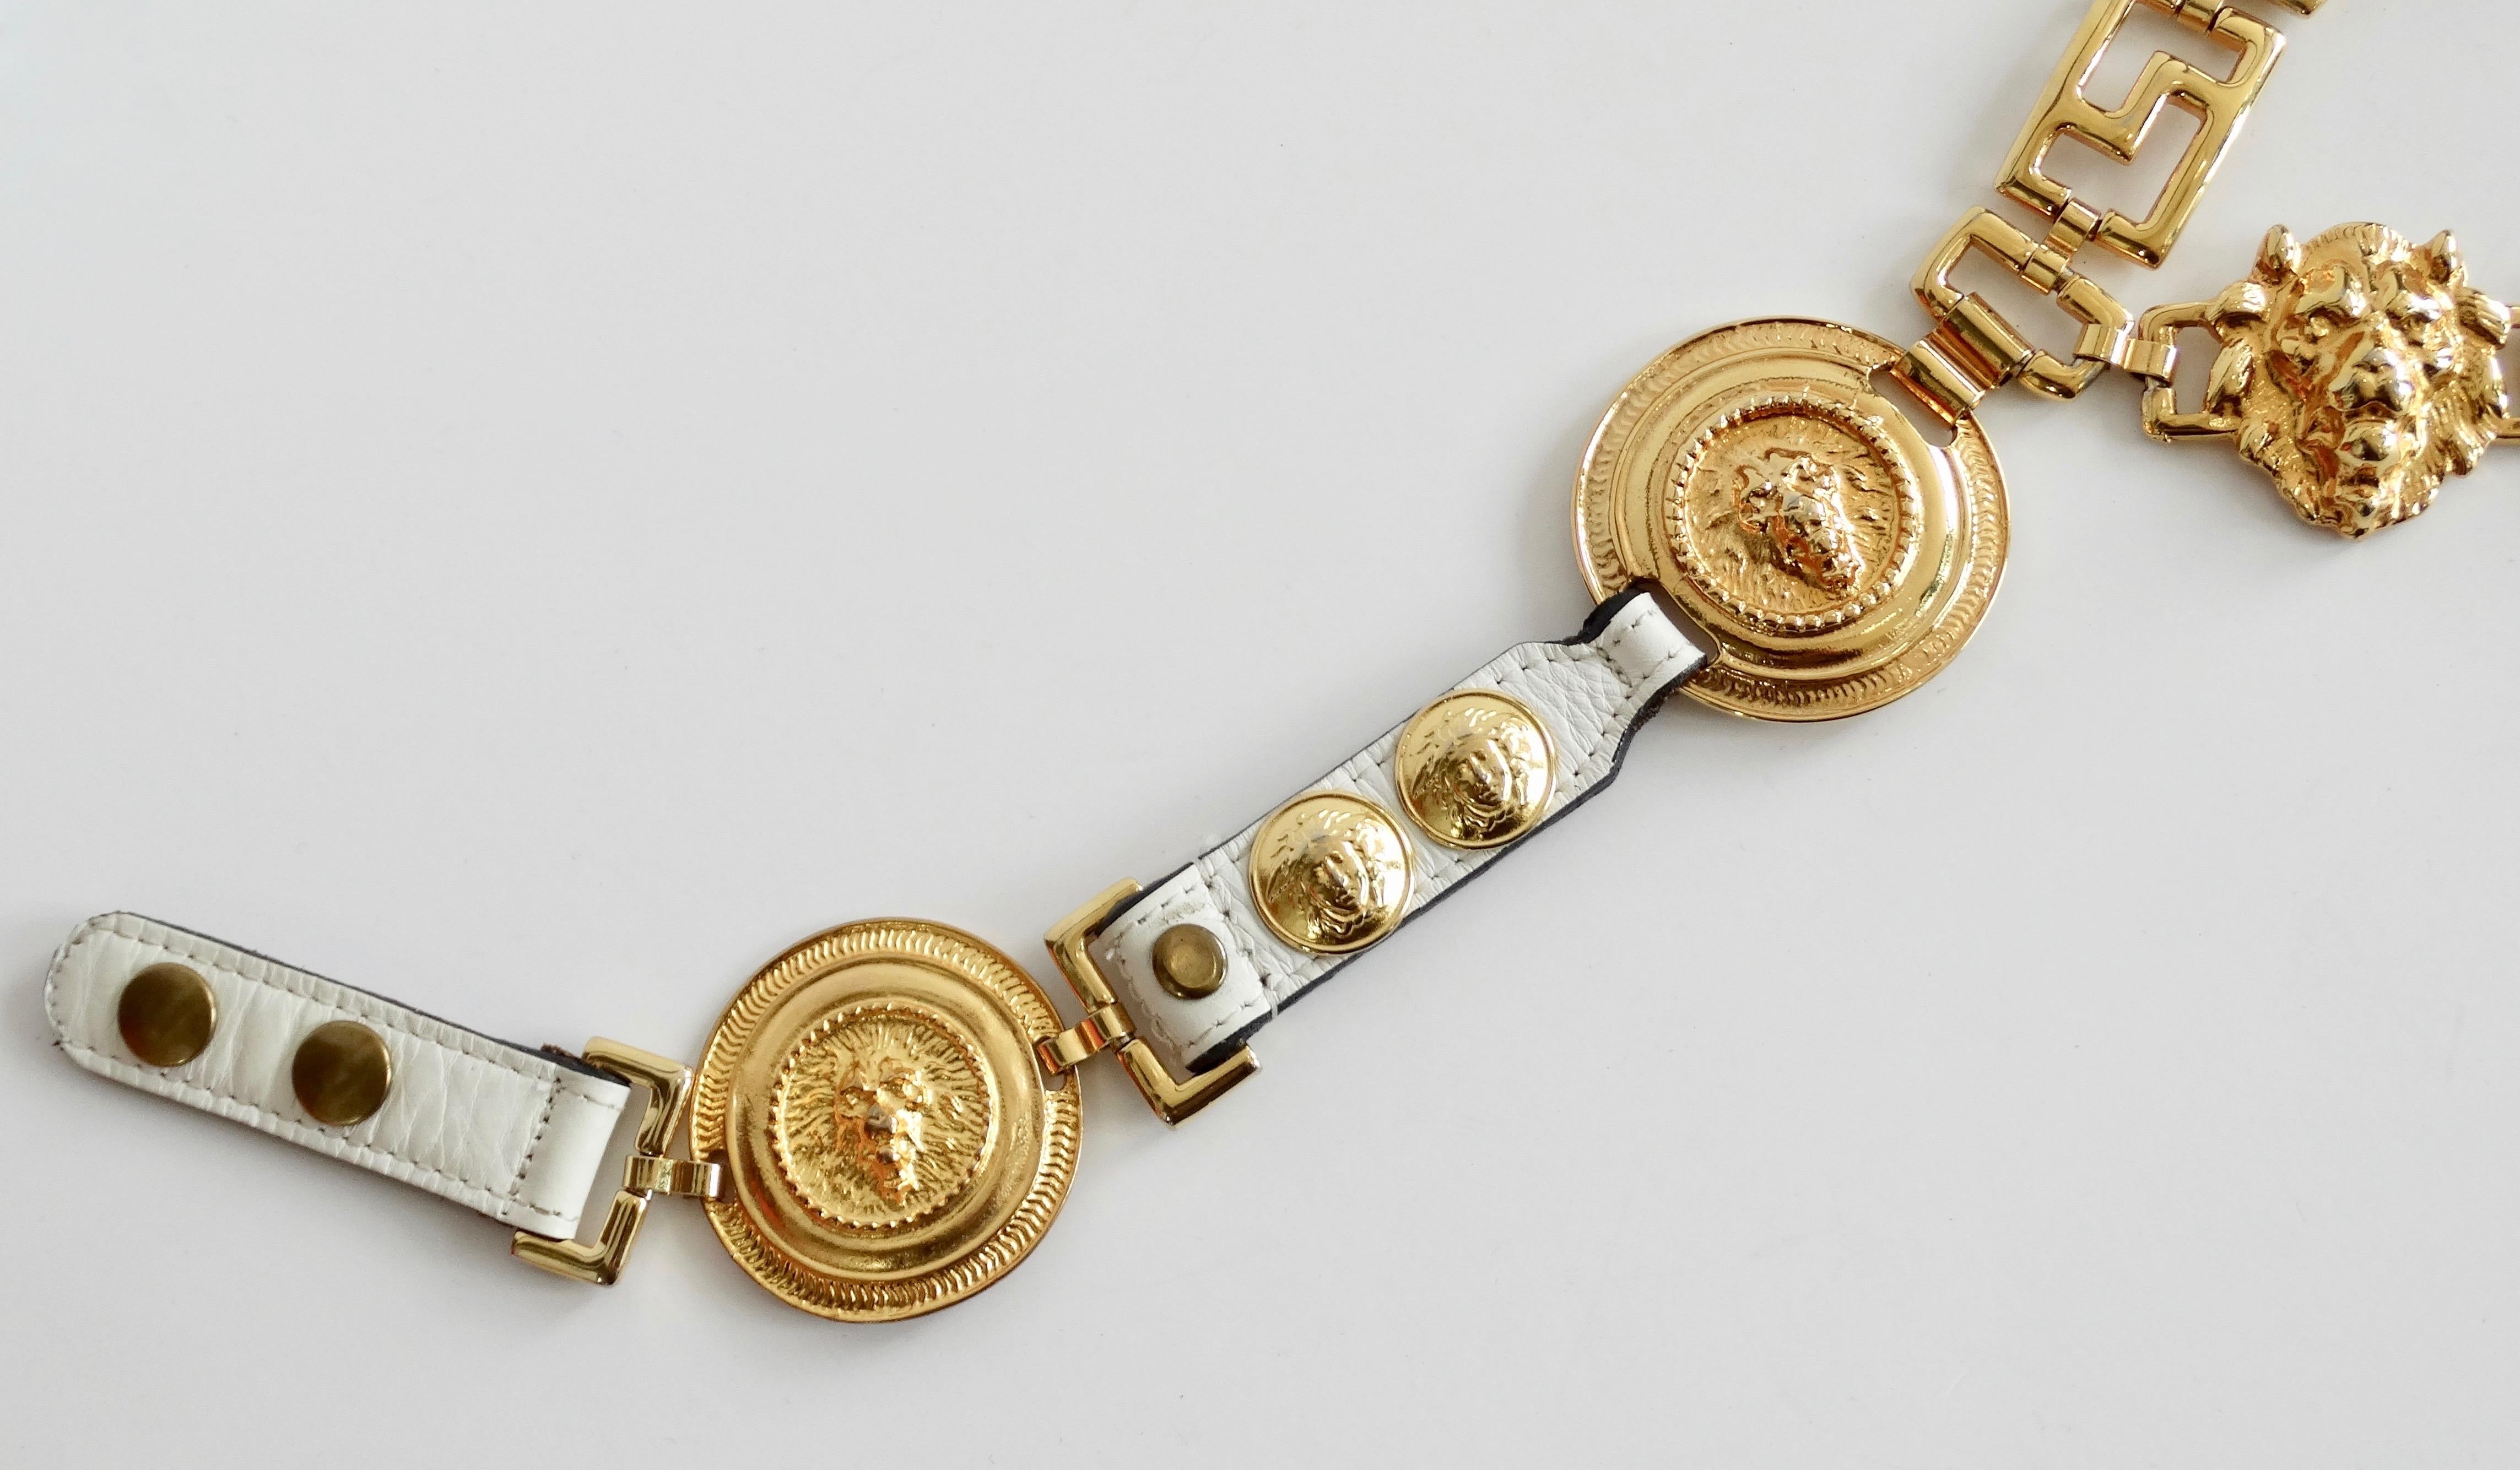 Give your outfit a whole new look with this killer unsigned Versace belt! Circa 1980s, this gold plated chain link belt features a single drop chain with a chain link tassel, white leather accents, the Versace Greek key and three sculpted lion